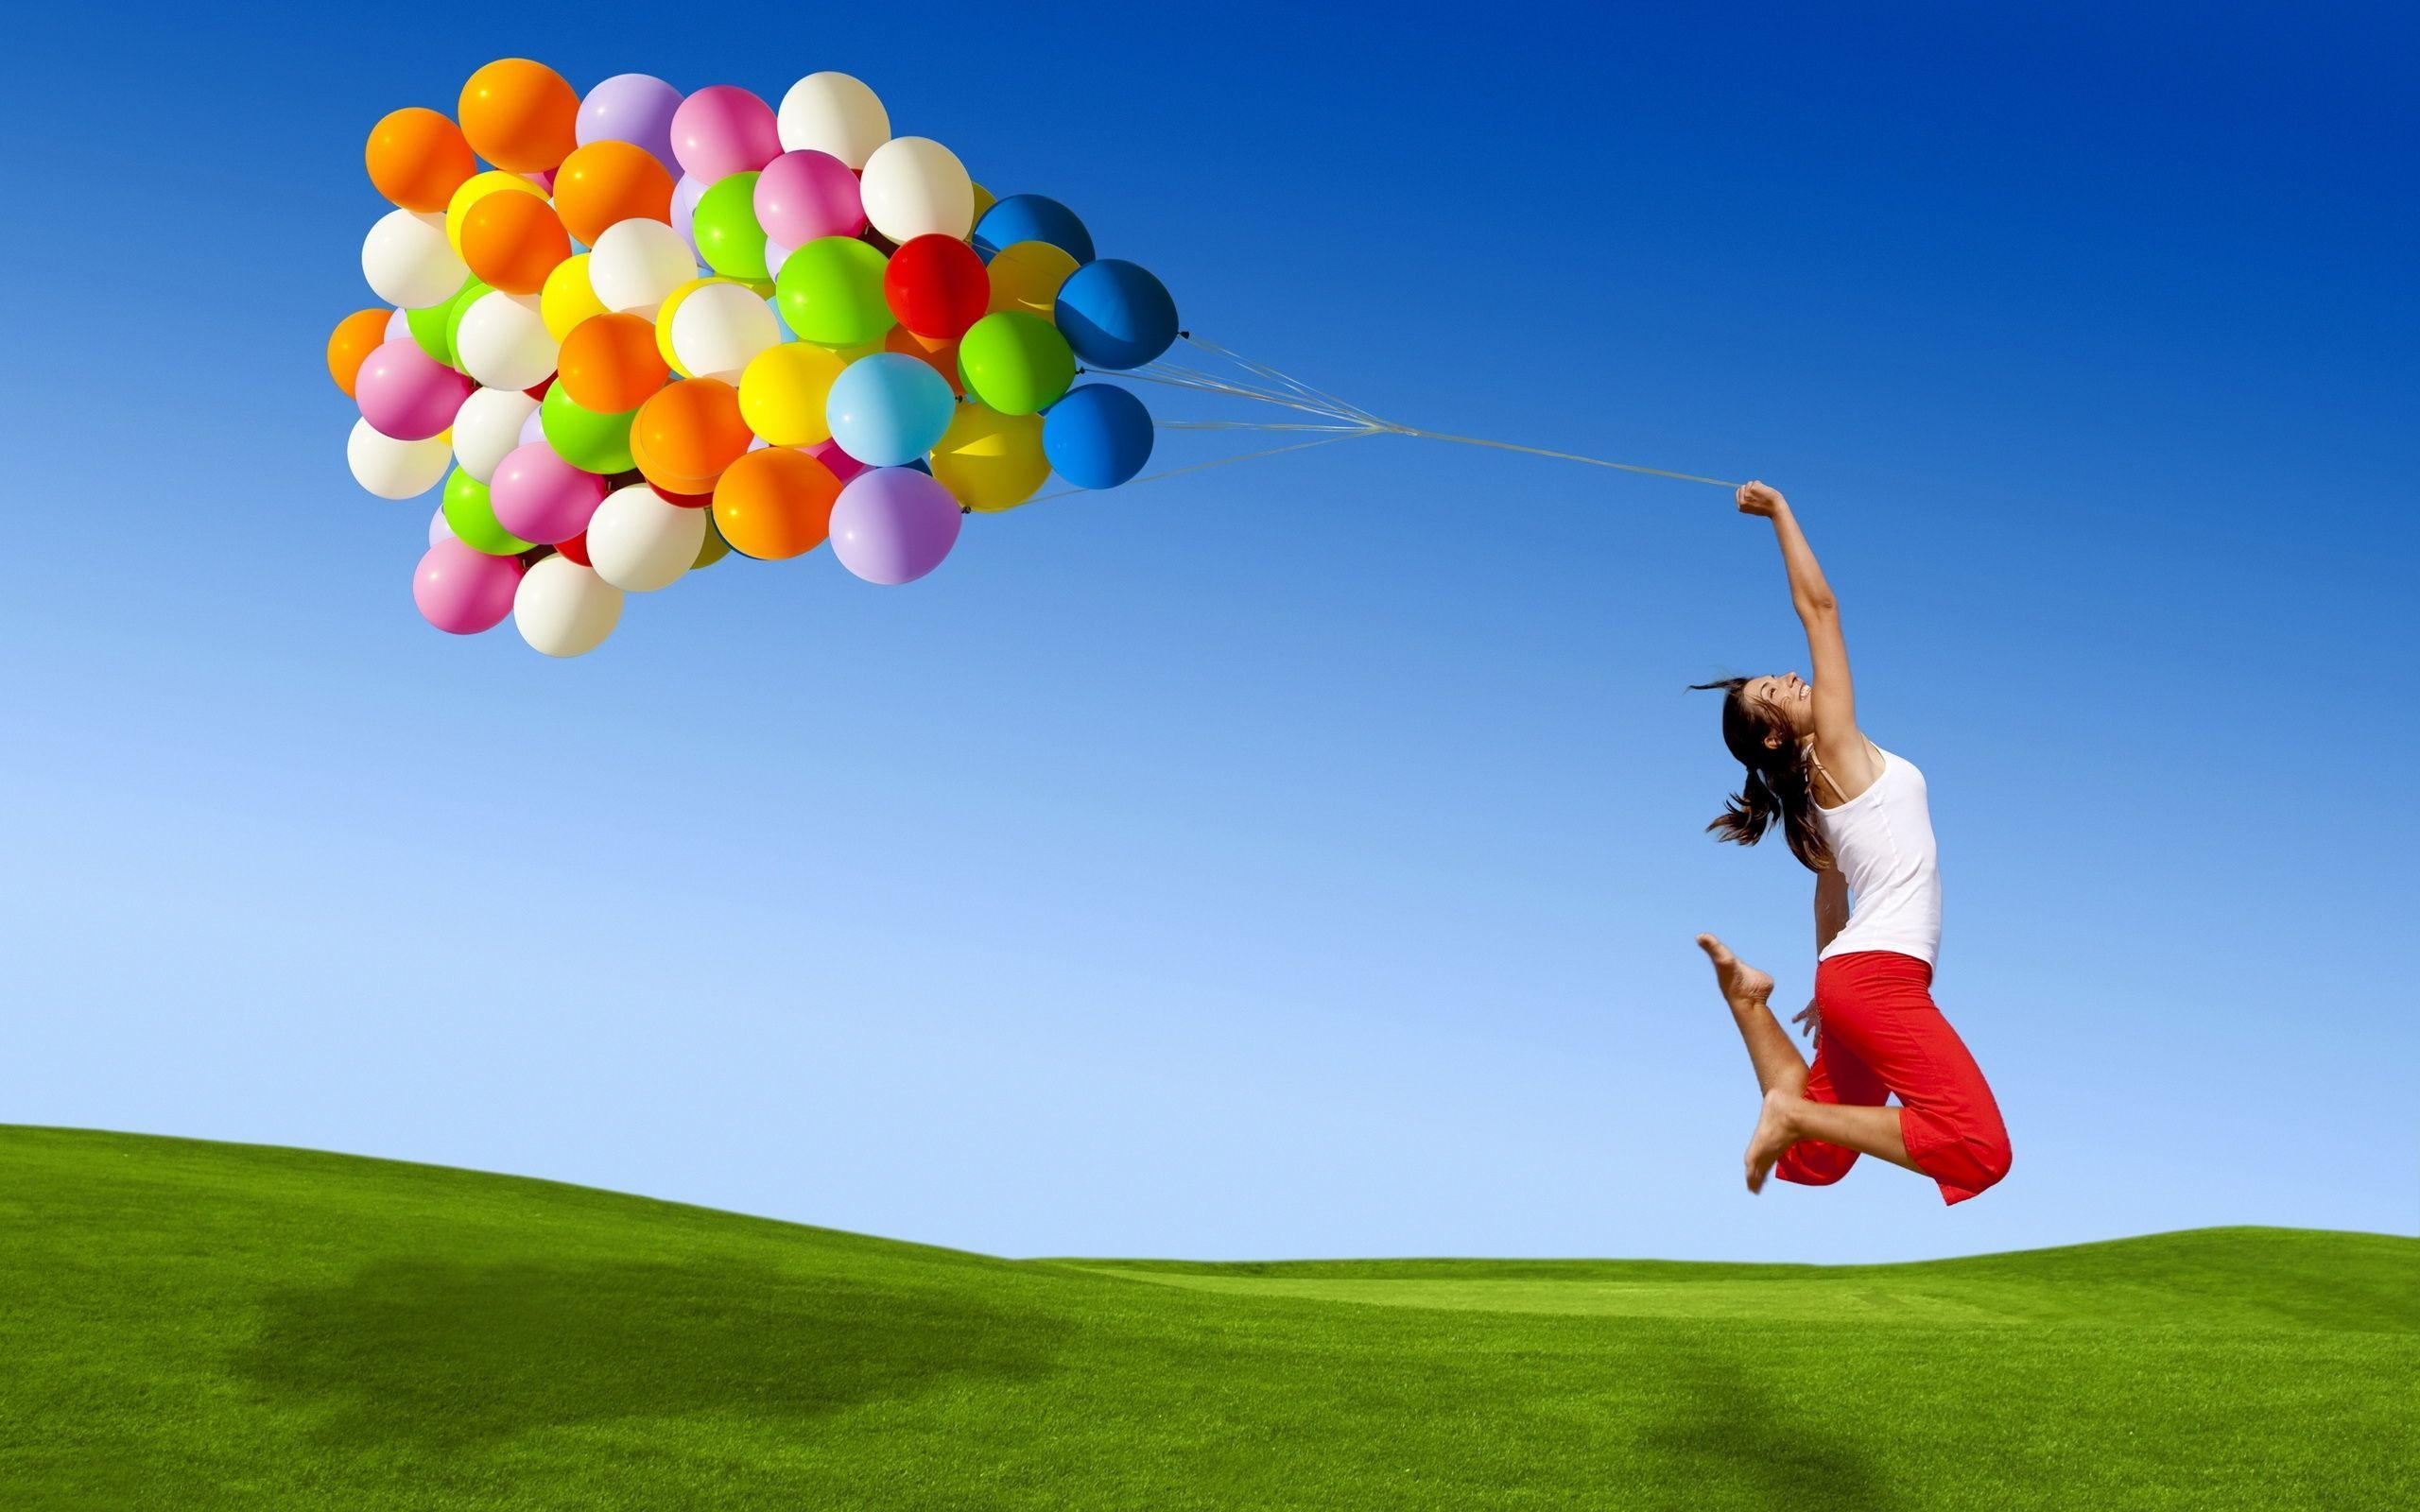 Girl and Balloons wallpaper and image, picture, photo